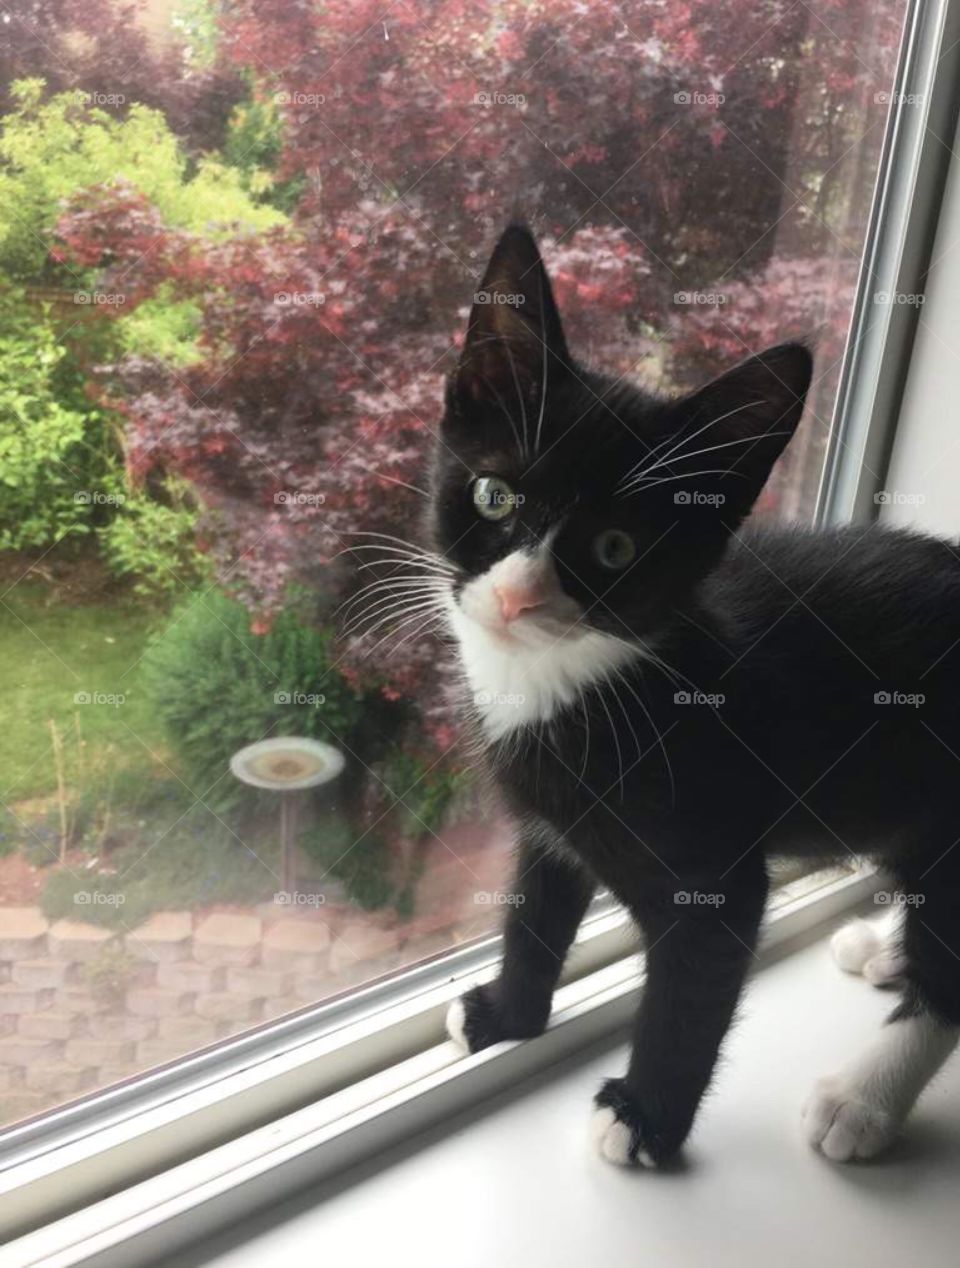 Black and white kitten standing in a window looking at camera